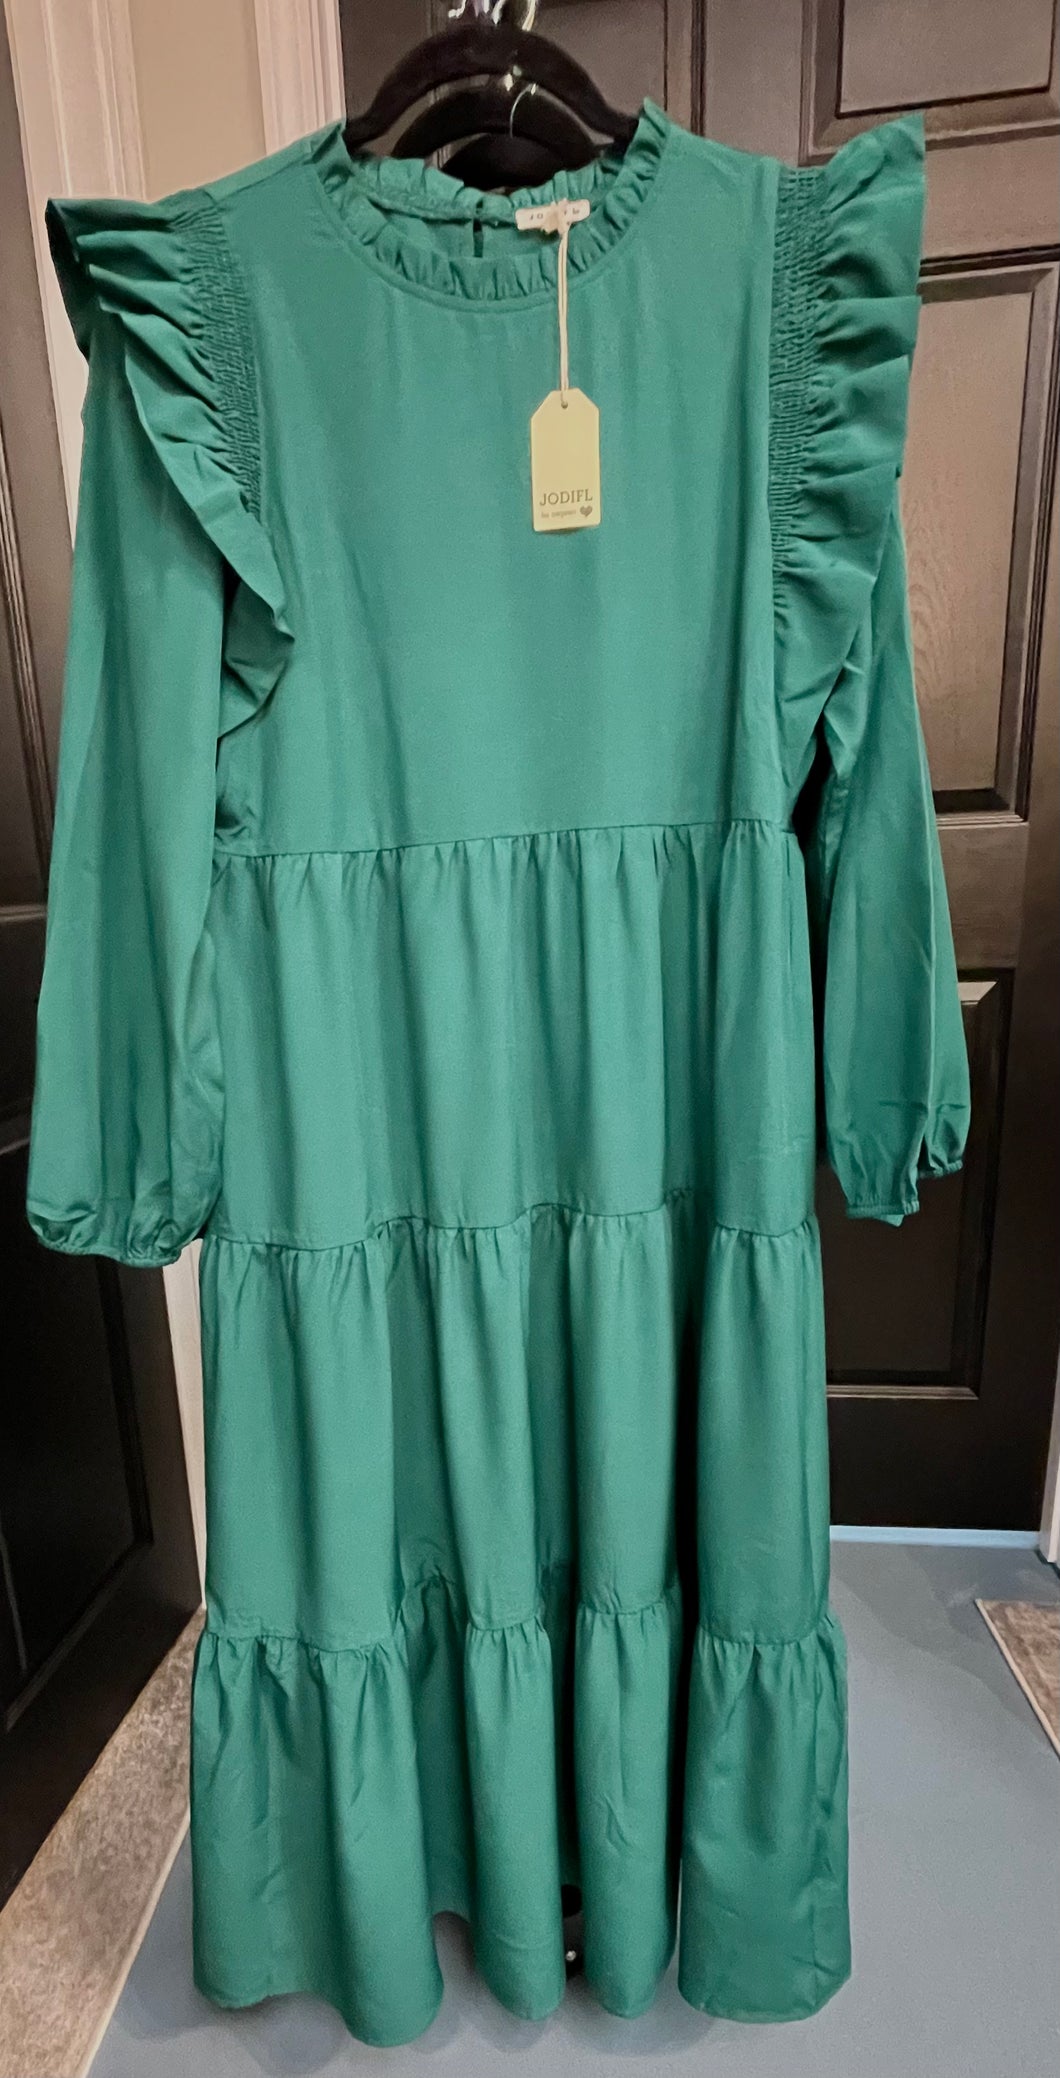 Solid Tiered Layer Maxi Dress - HUNTER GREEN